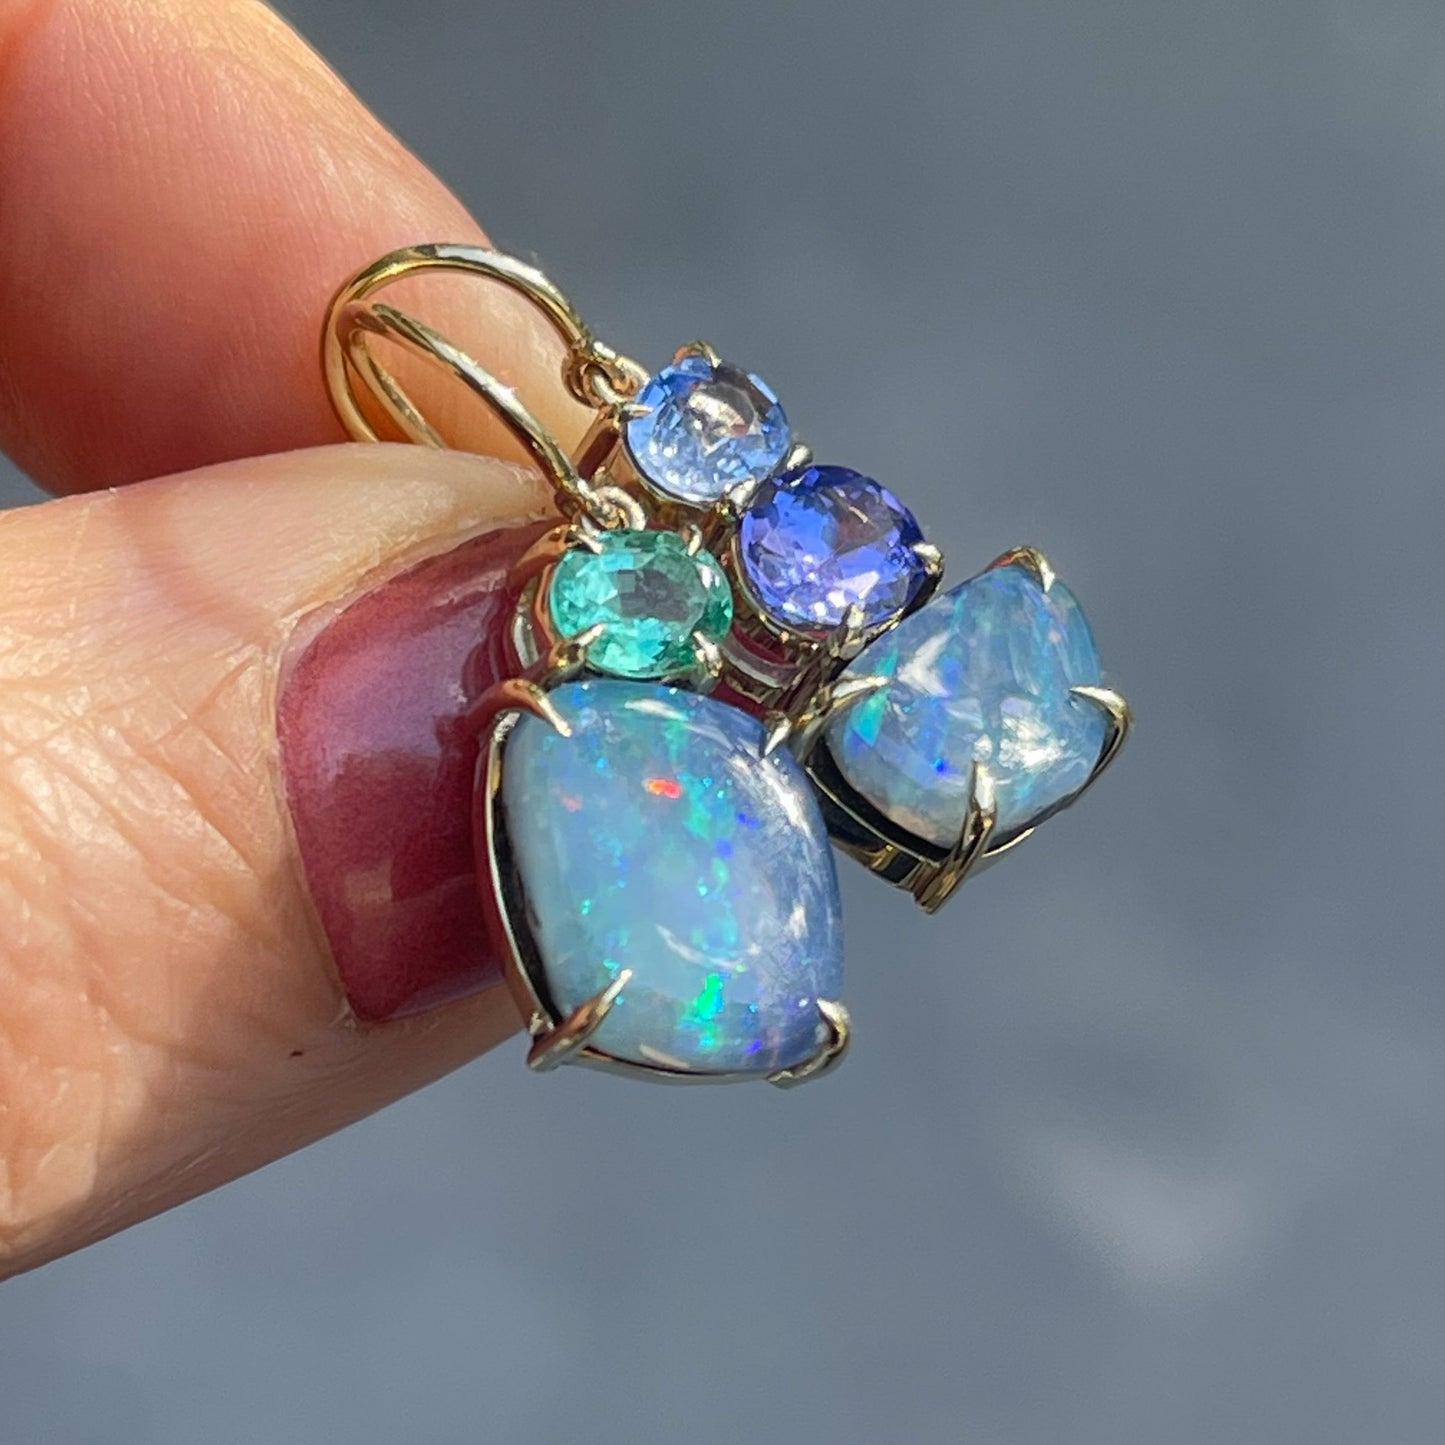 Australian Opal Earrings by NIXIN Jewelry held at an angle in sunlight. Mismatched earrings with blue opals and gemstones.